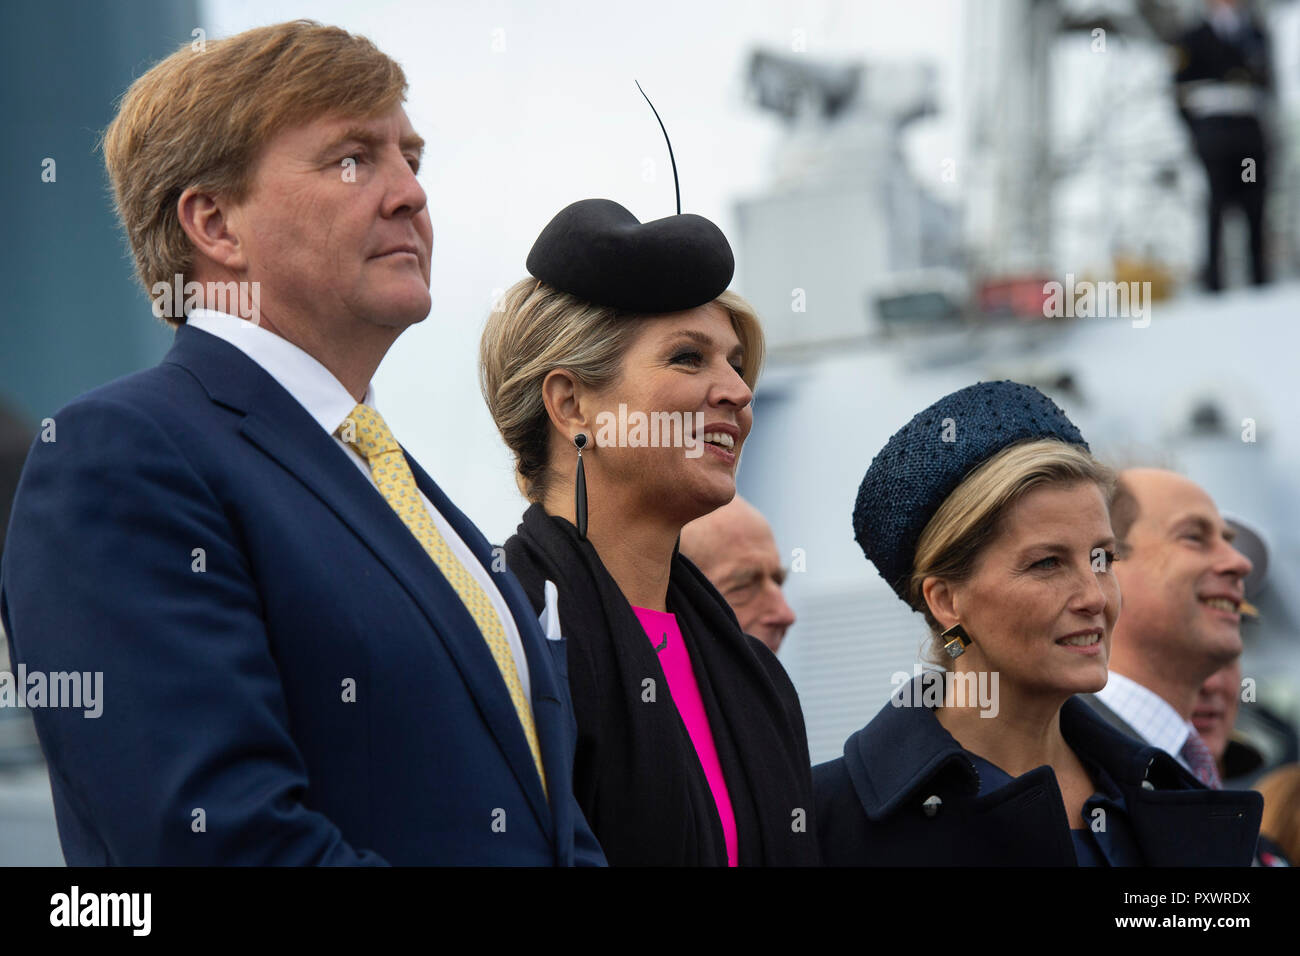 (Left to right) King Willem-Alexander and Queen Maxima of the Netherlands with the Countess of Wessex on HMS Belfast in London to watch an on-the-water capability demonstration between the Royal Netherlands Marine Corps and the Royal Marines. Stock Photo